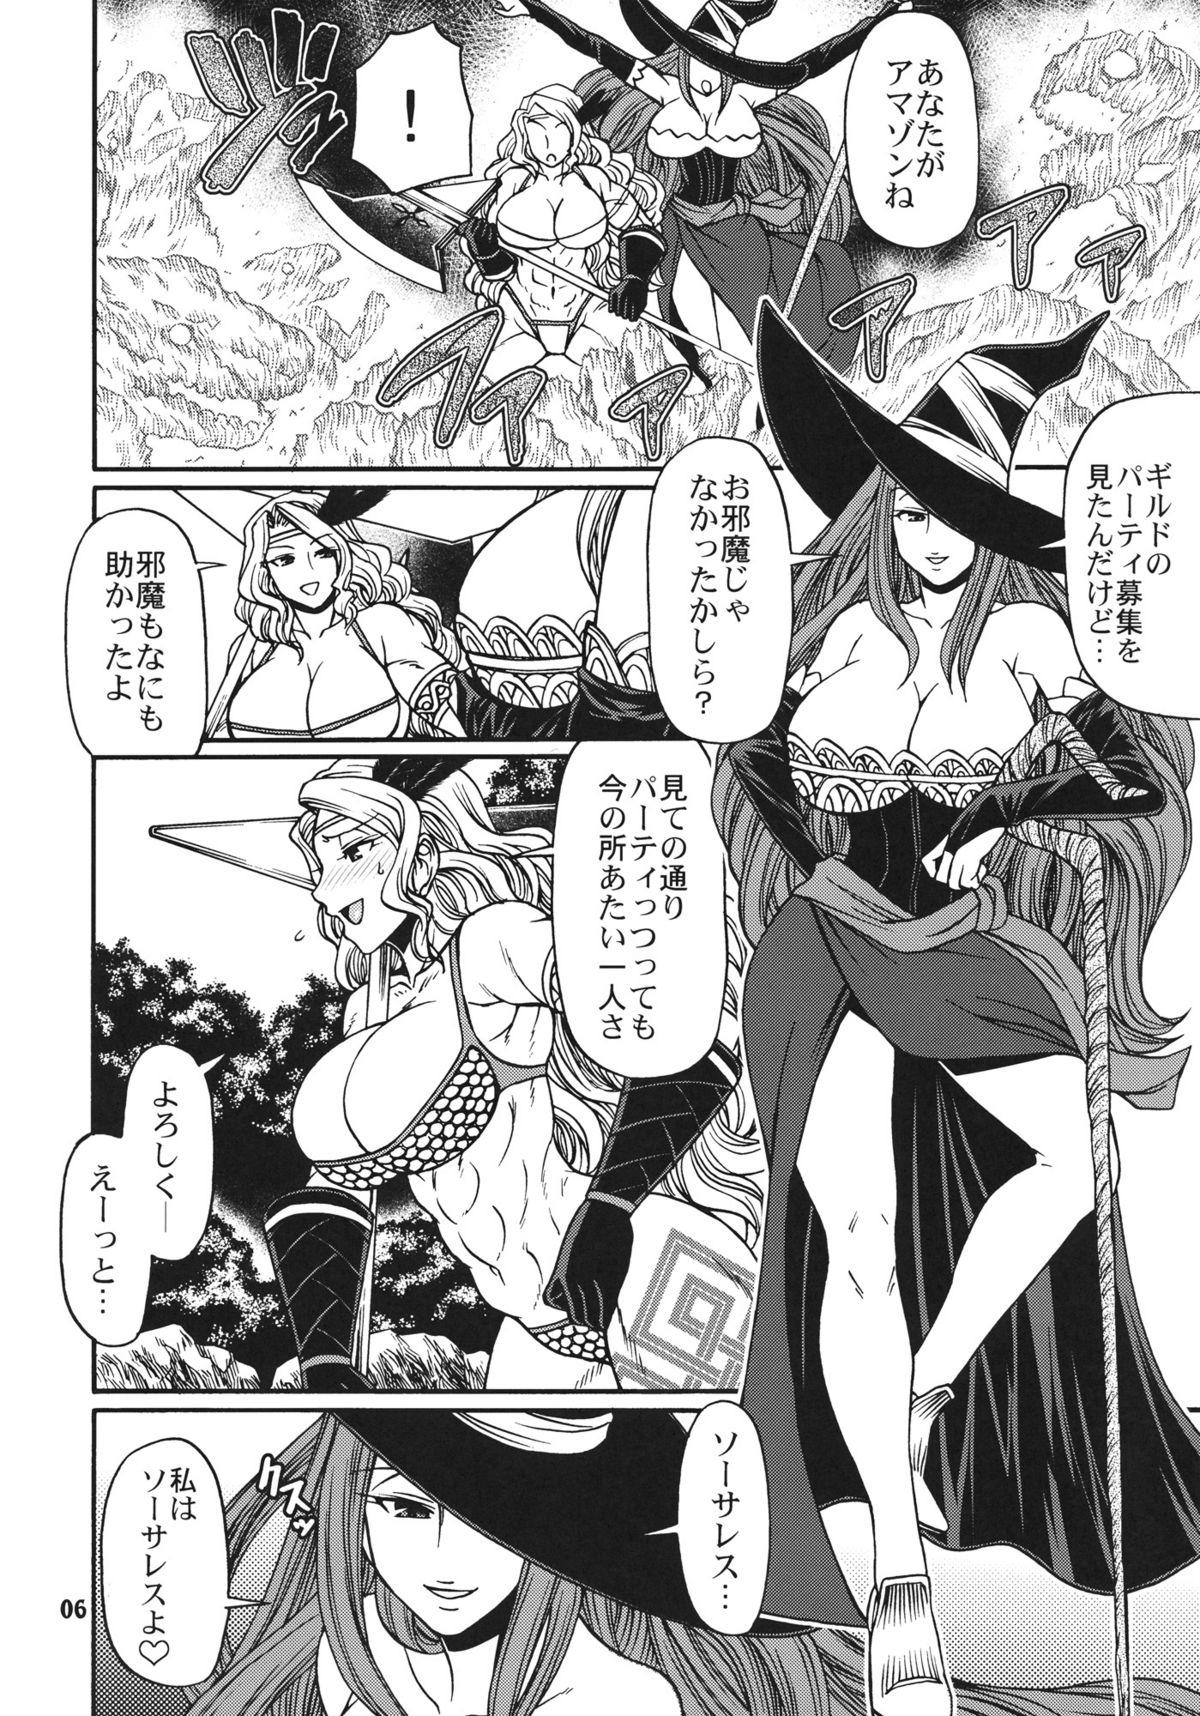 Cosplay PARTY HARD - Dragons crown Coed - Page 5